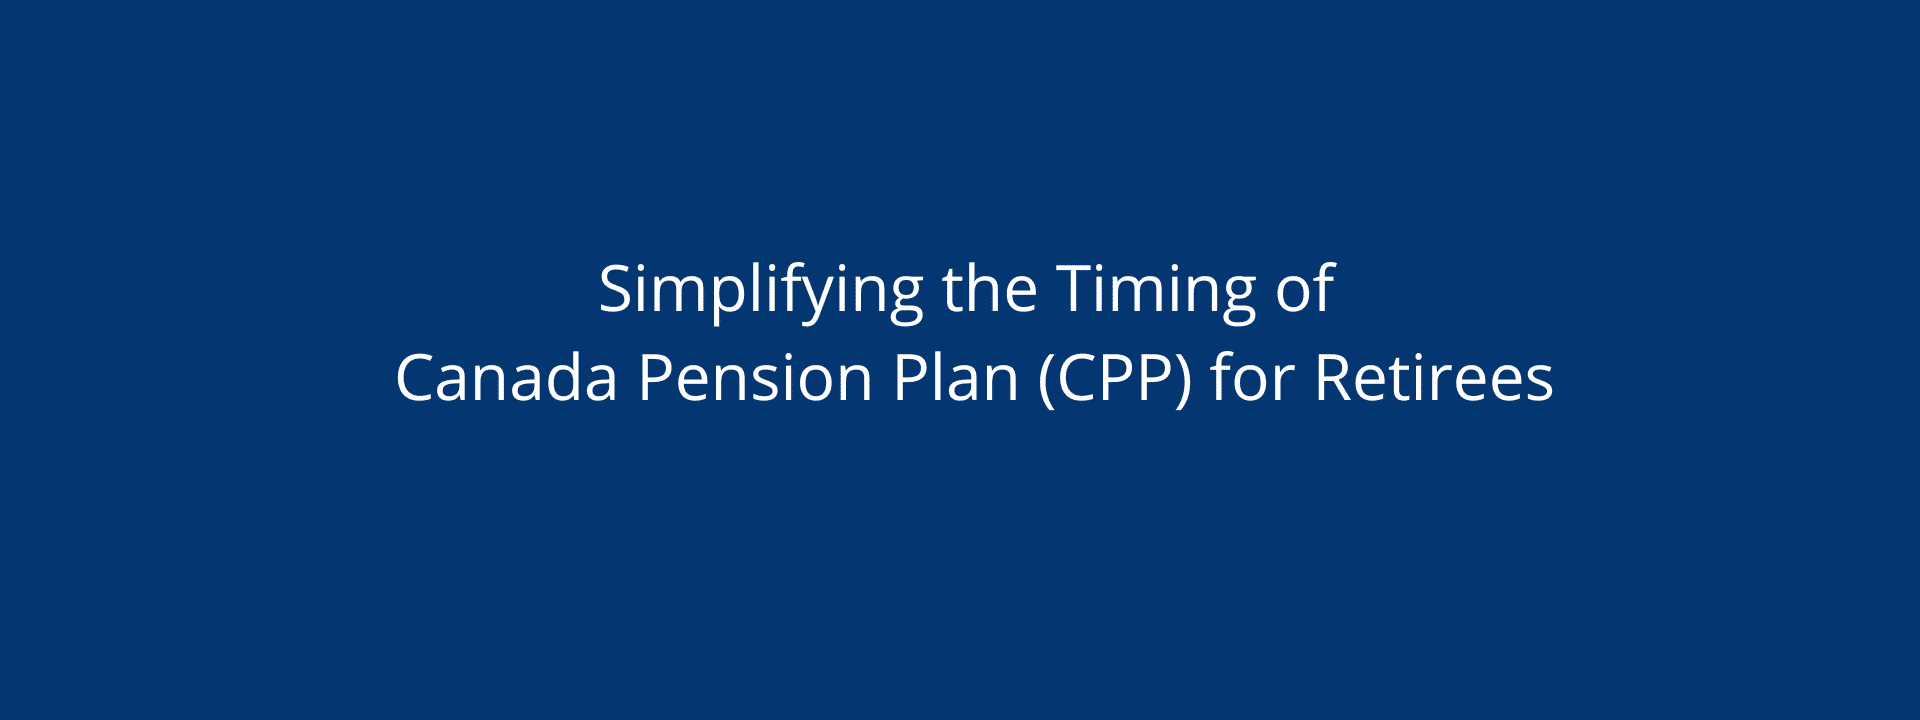 Simplifying Timing of CPP for Retirees